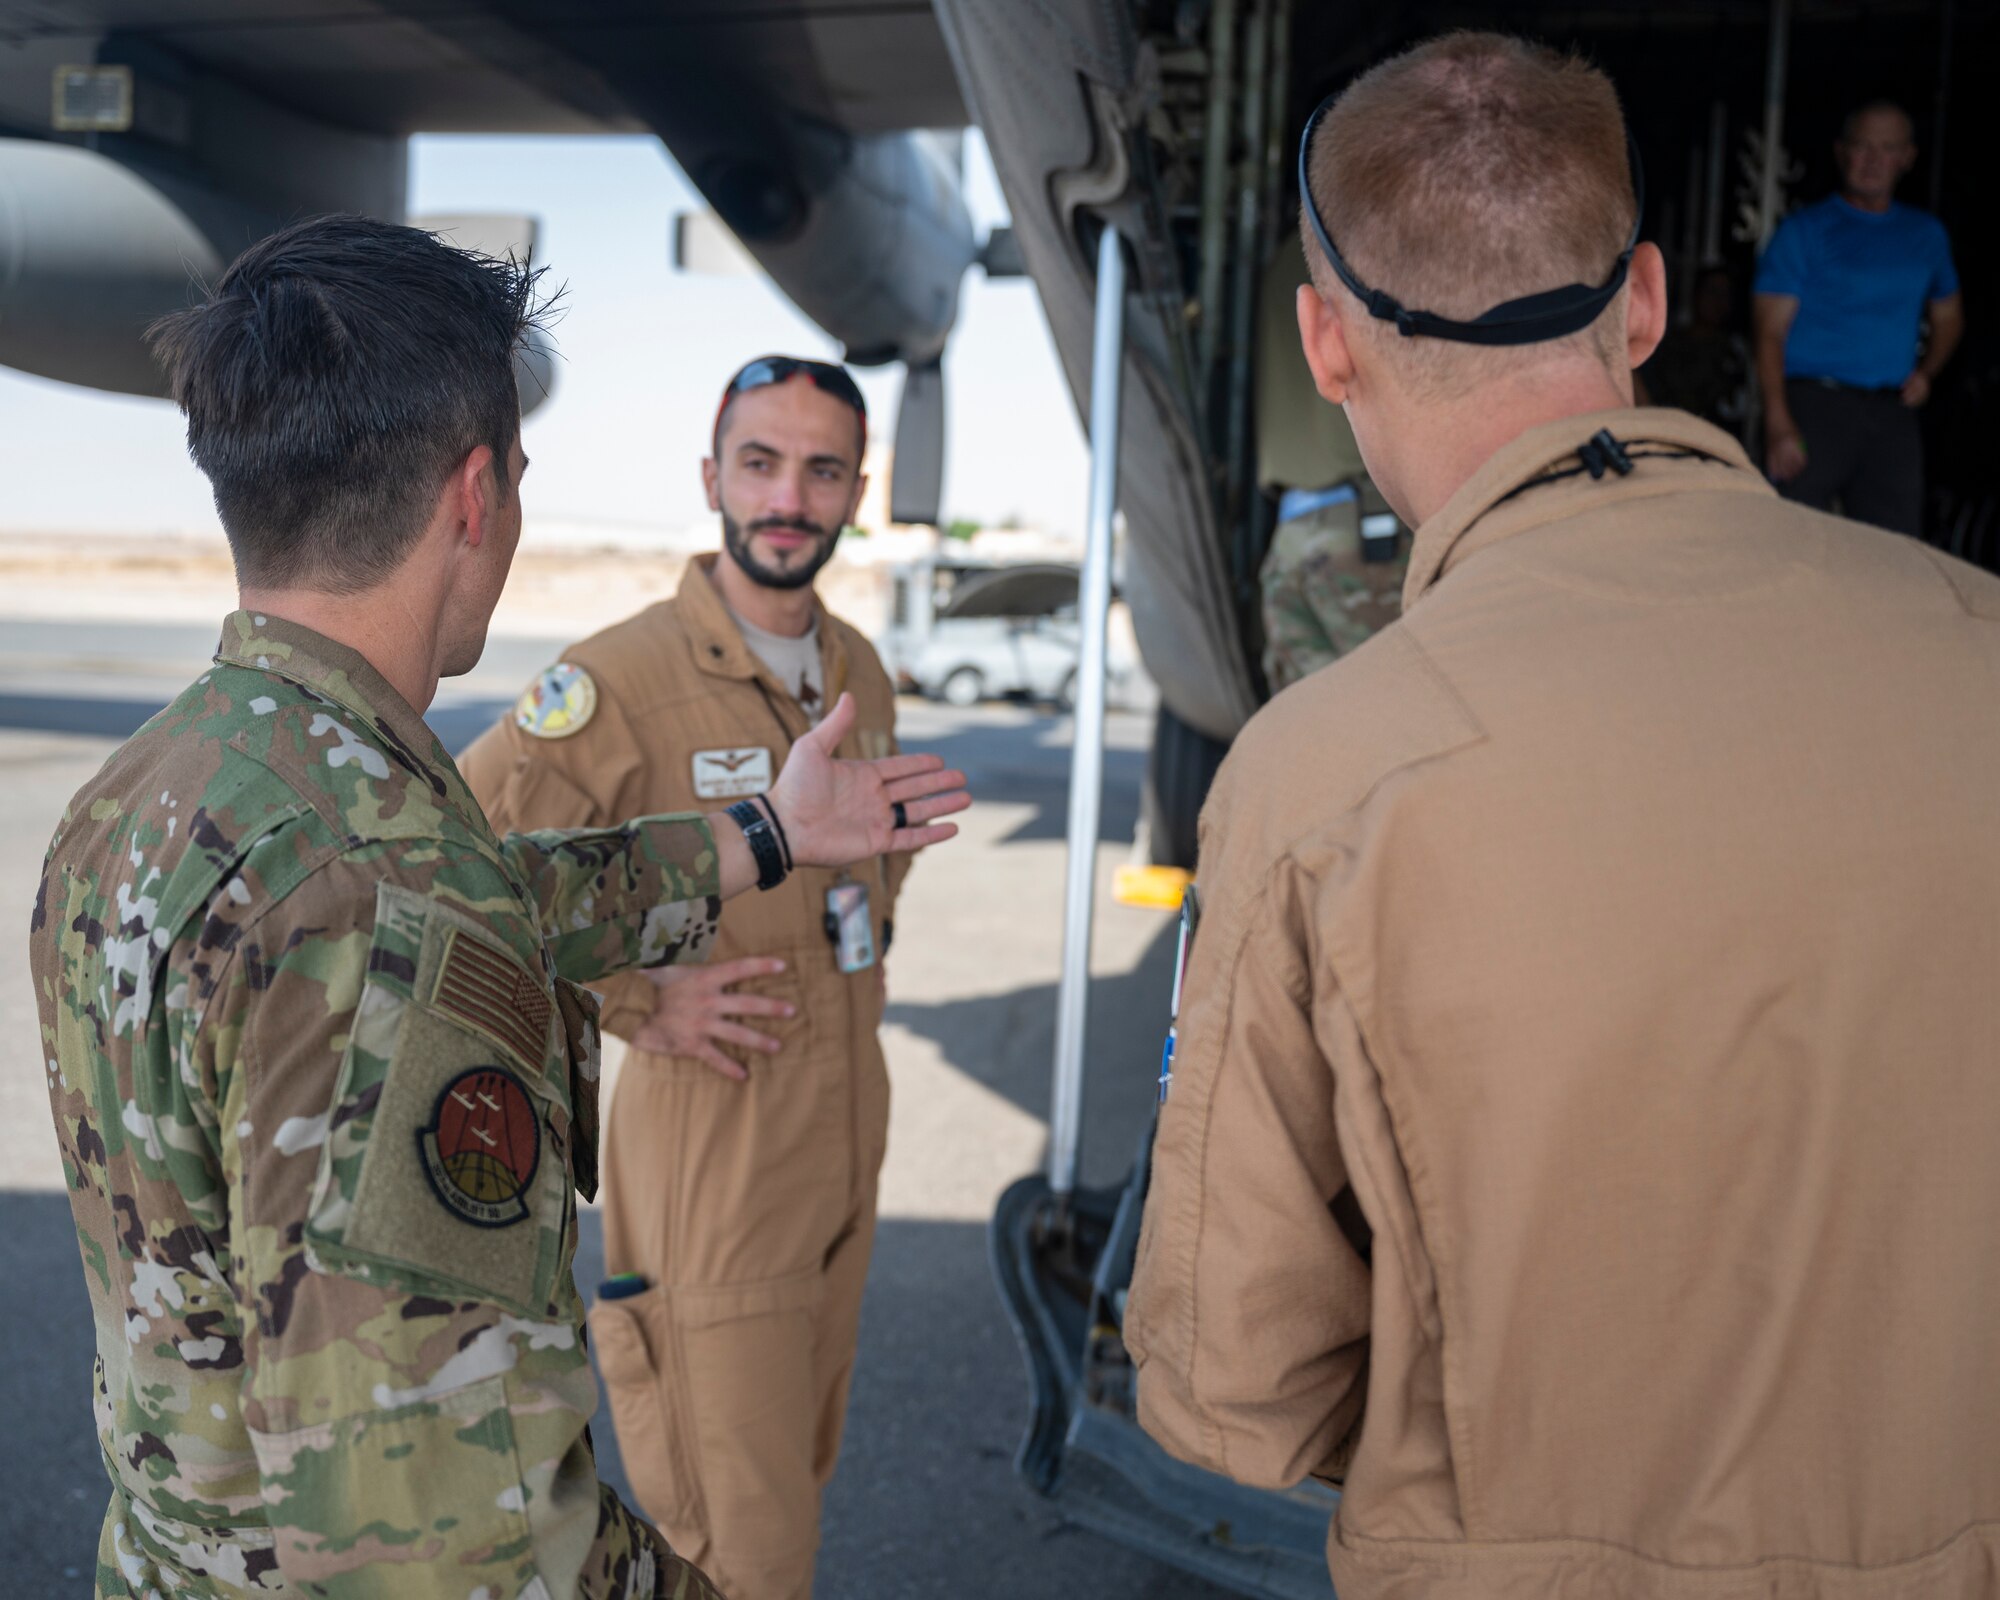 U.S. Air Force Maj. Scott Graves, a pilot assigned to the 779th Expeditionary Airlift Squadron, interacts with members of the Italian Air Force during a C-130H Hercules tour at Ali Al Salem Air Base, Kuwait, Oct. 9, 2021.